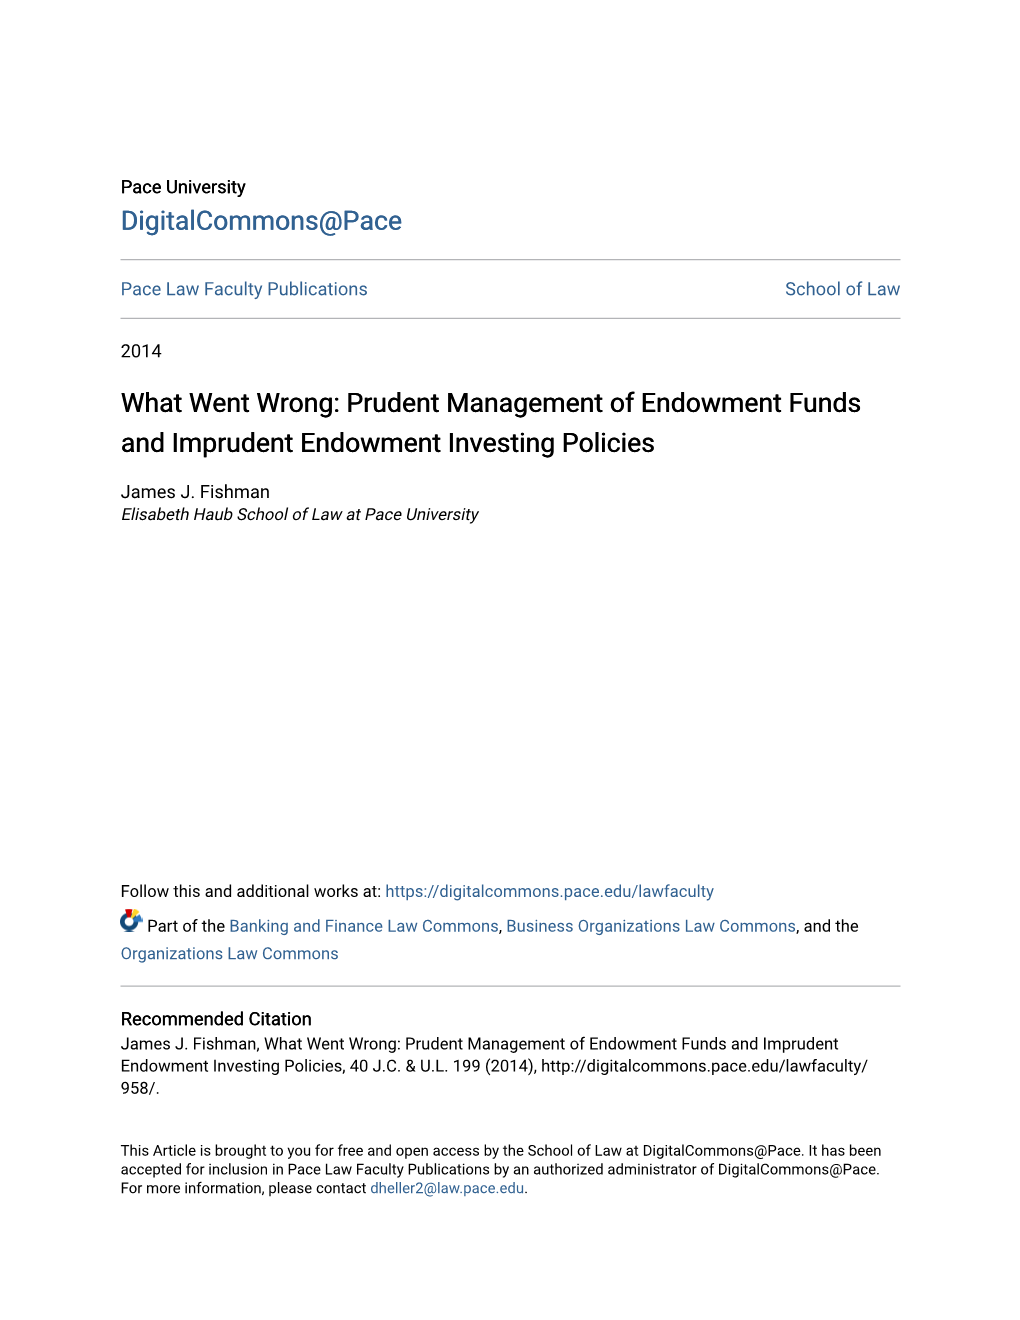 What Went Wrong: Prudent Management of Endowment Funds and Imprudent Endowment Investing Policies